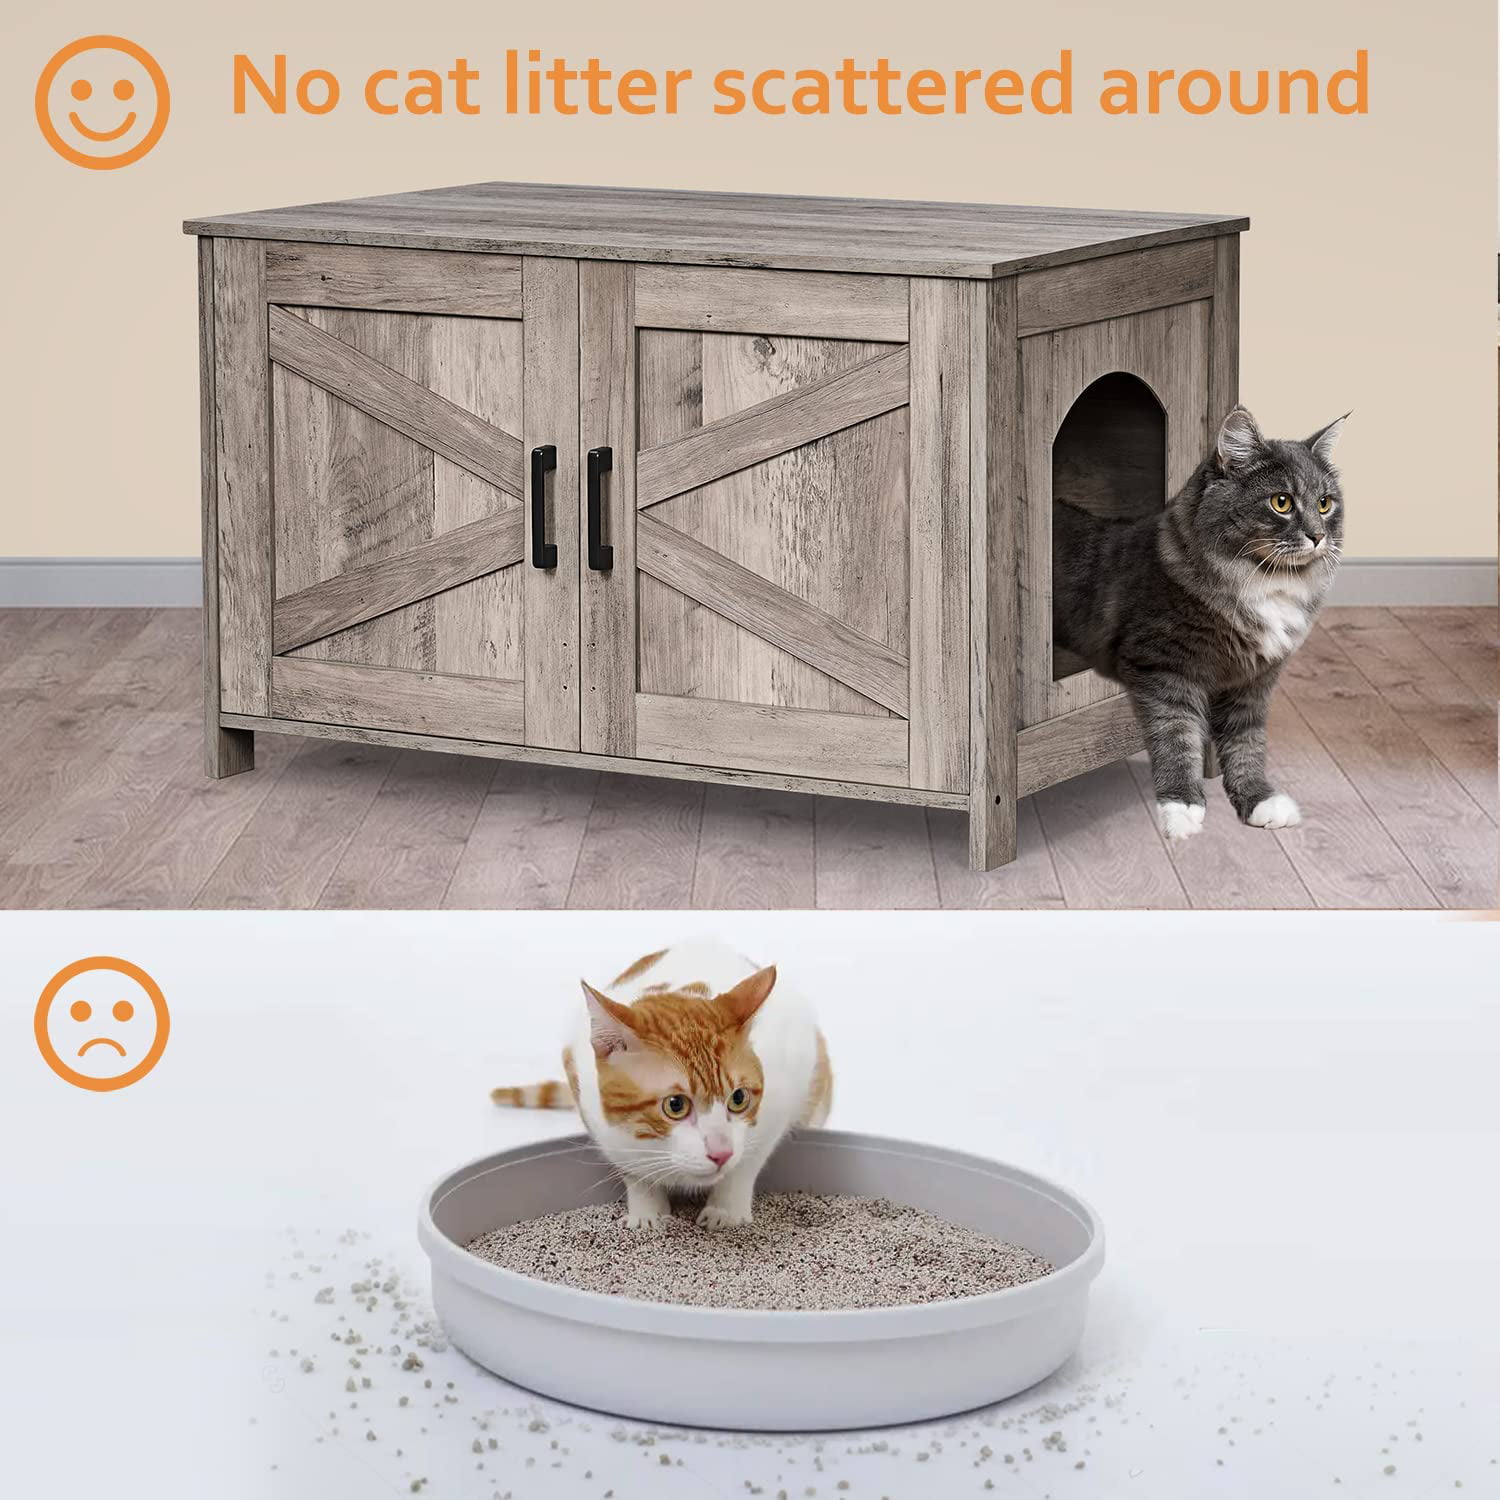  DINZI LVJ Litter Box Enclosure, Cat Litter House with Louvered  Doors, Entrance Can Be on Left or Right Side, Spacious Hidden Cat Washroom  for Most of Litter Box, Cat Furniture Cabinet